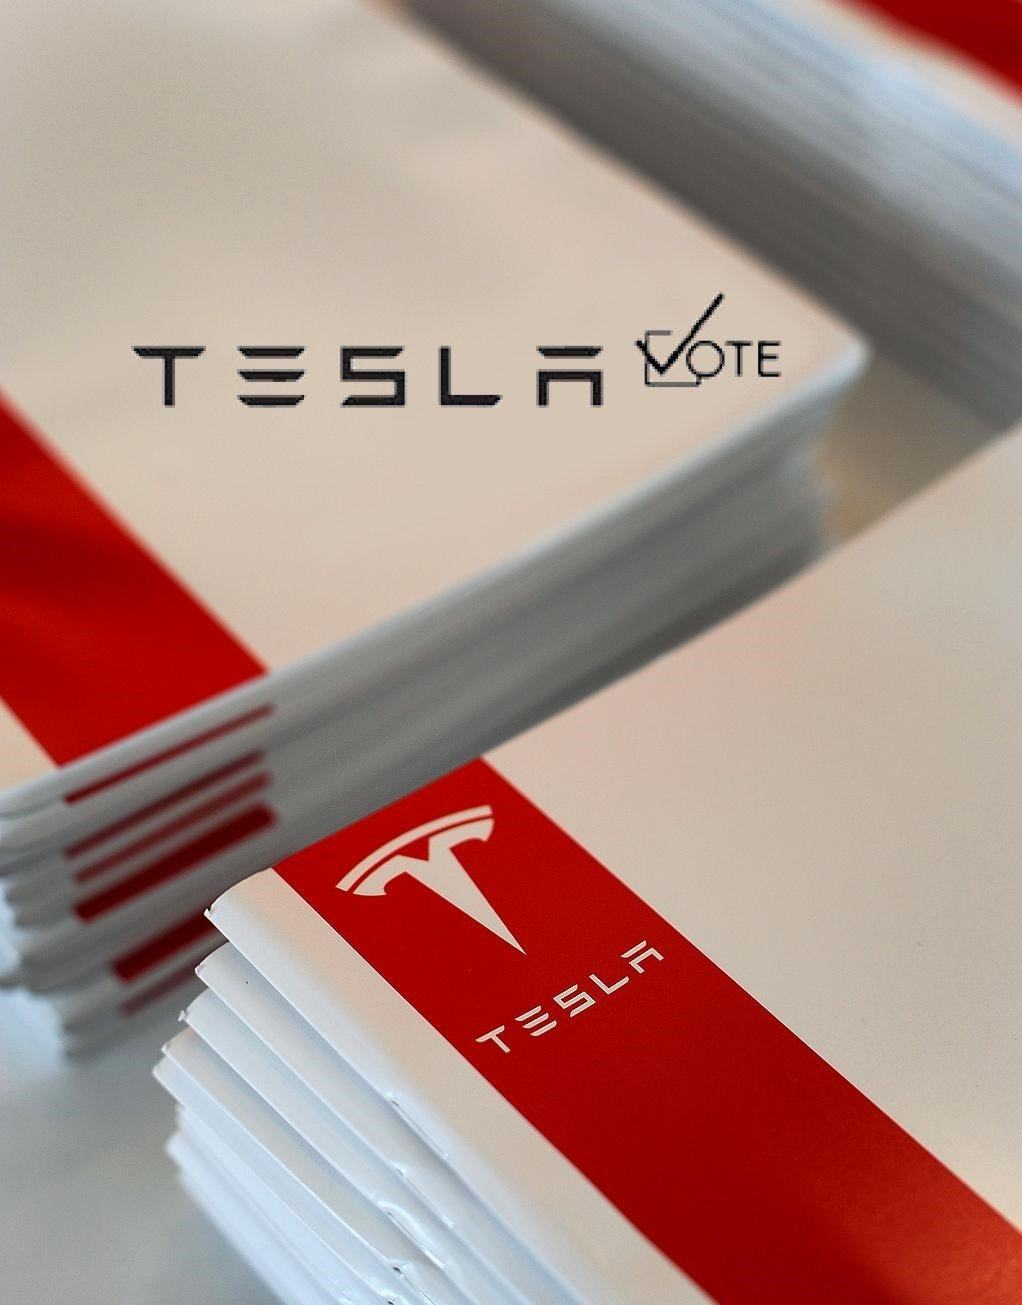 Tesla Shareholders Meeting 2020 Will Be Postponed & Possibly Combines With Battery Day